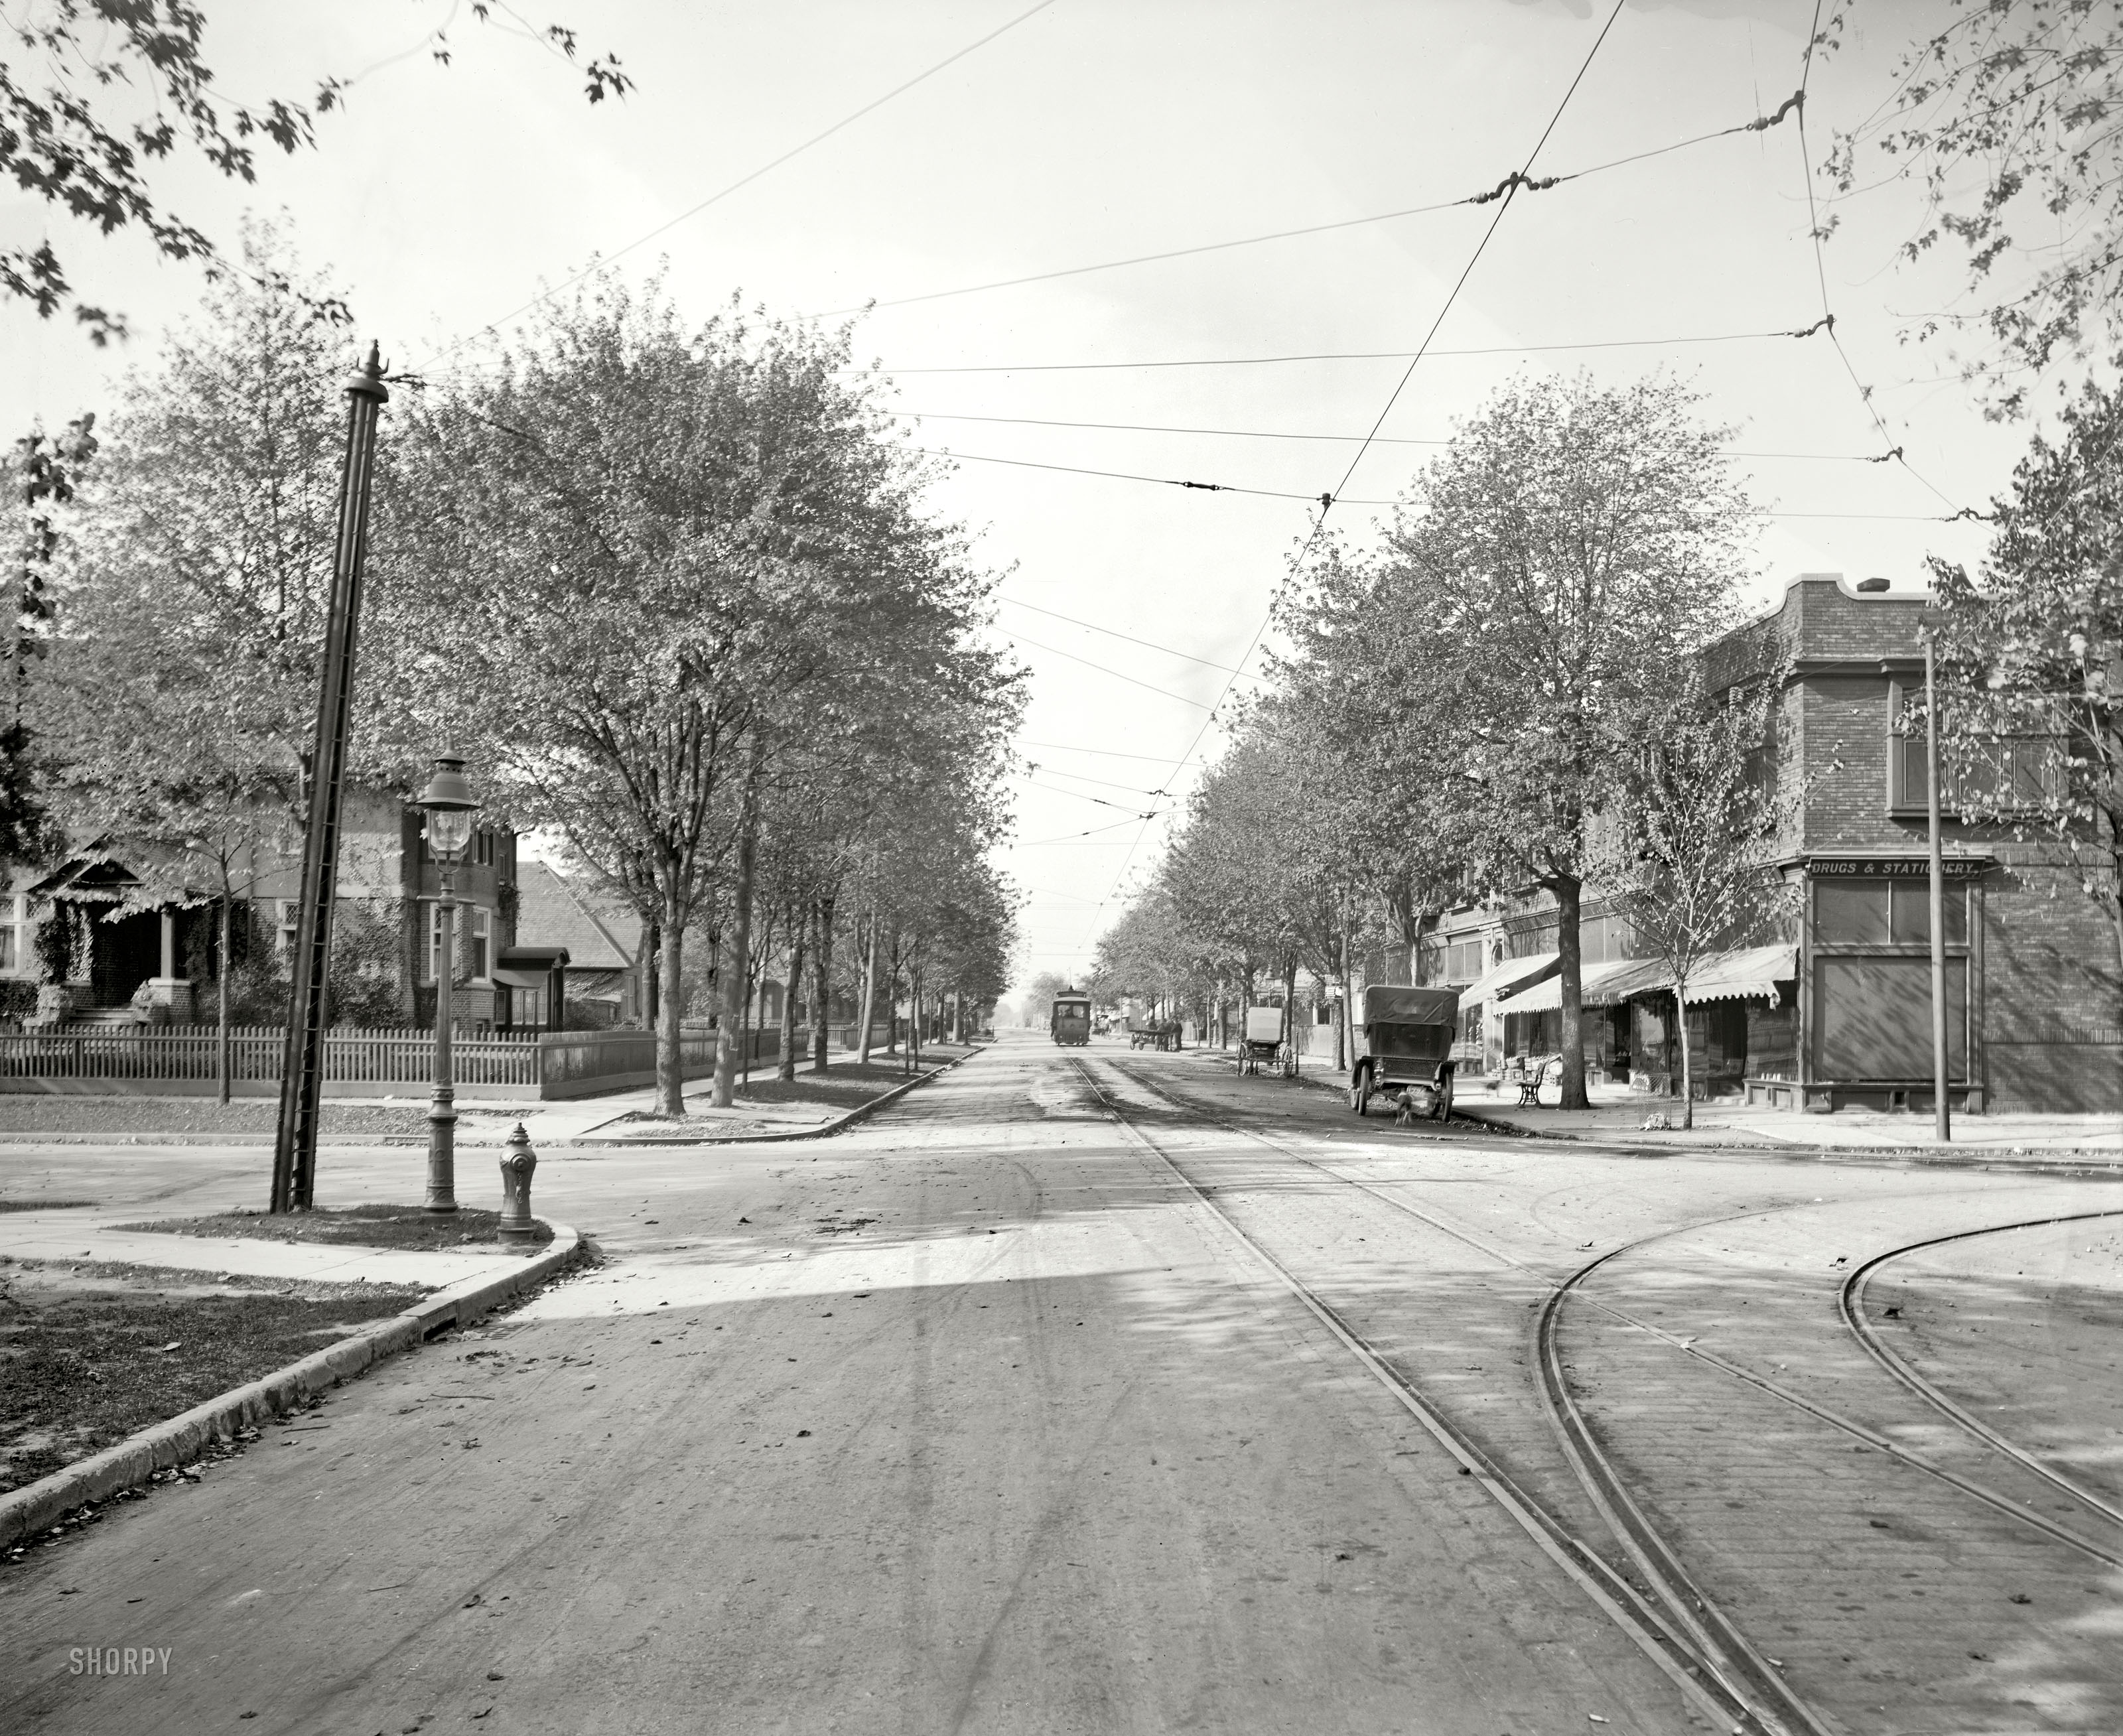 Circa 1910. "Business corner of Wyandotte and Devonshire roads, Walkerville, Ontario." 8x10 inch glass negative, Detroit Publishing Company. View full size.